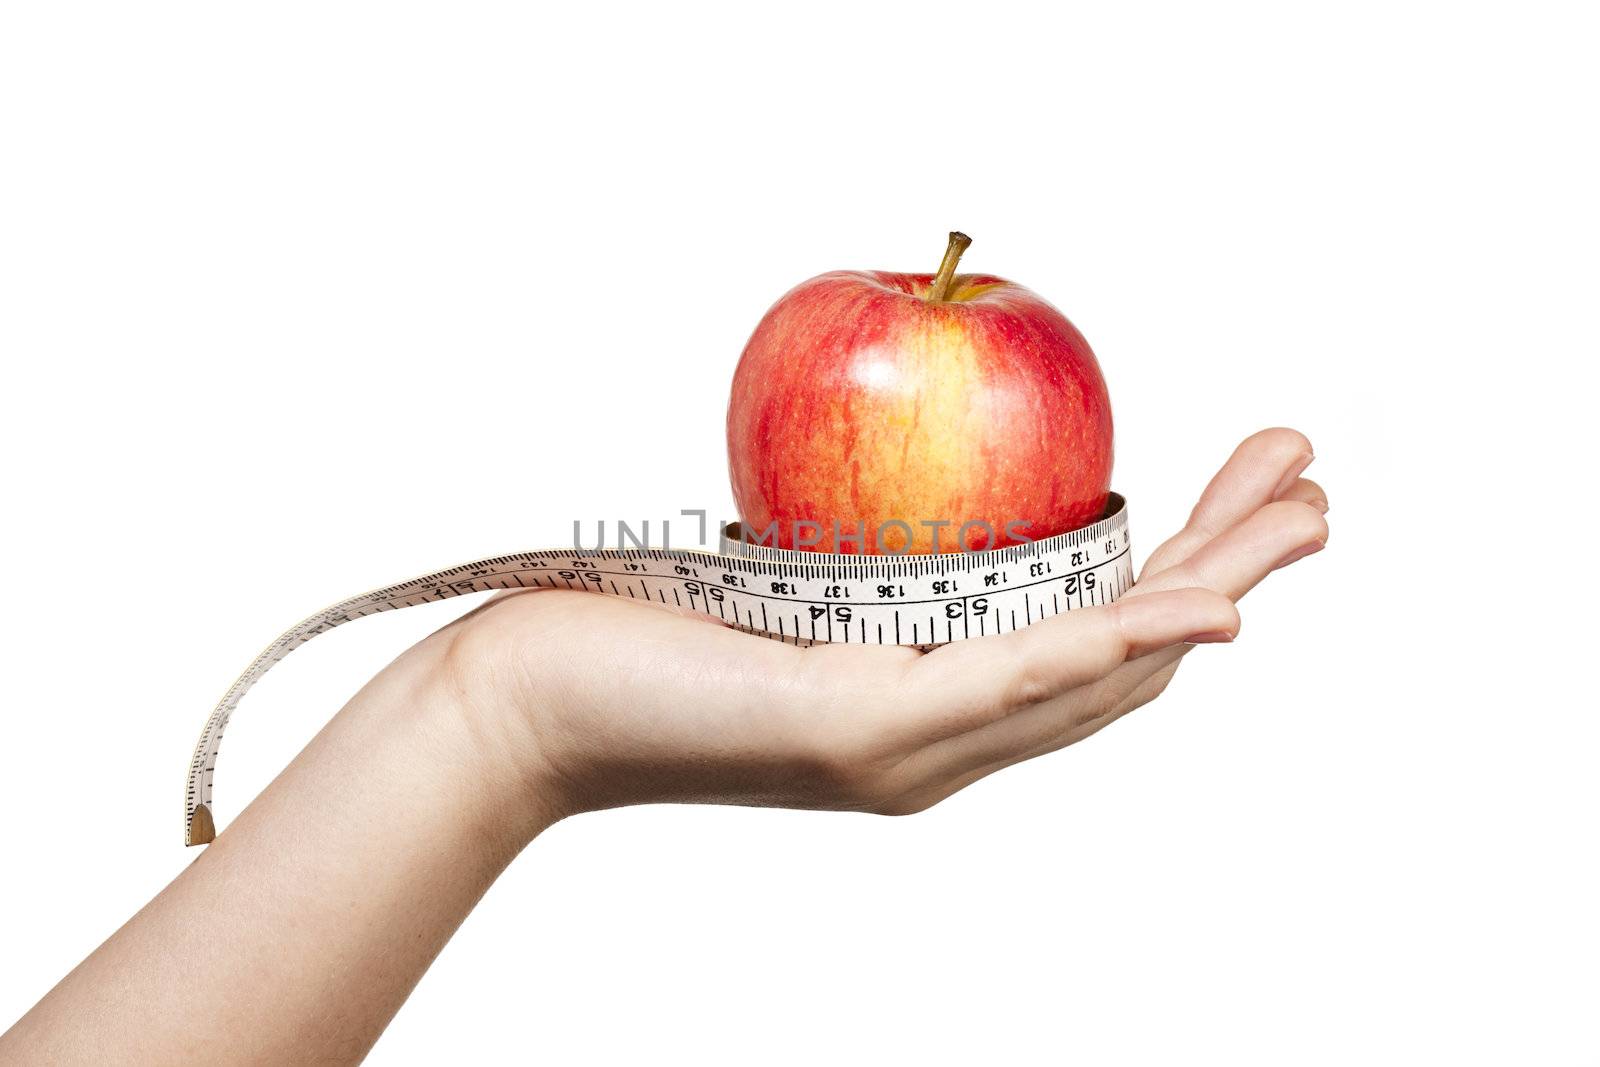 Hand extened with an apple resting and wrapped in a flexible tape measure.